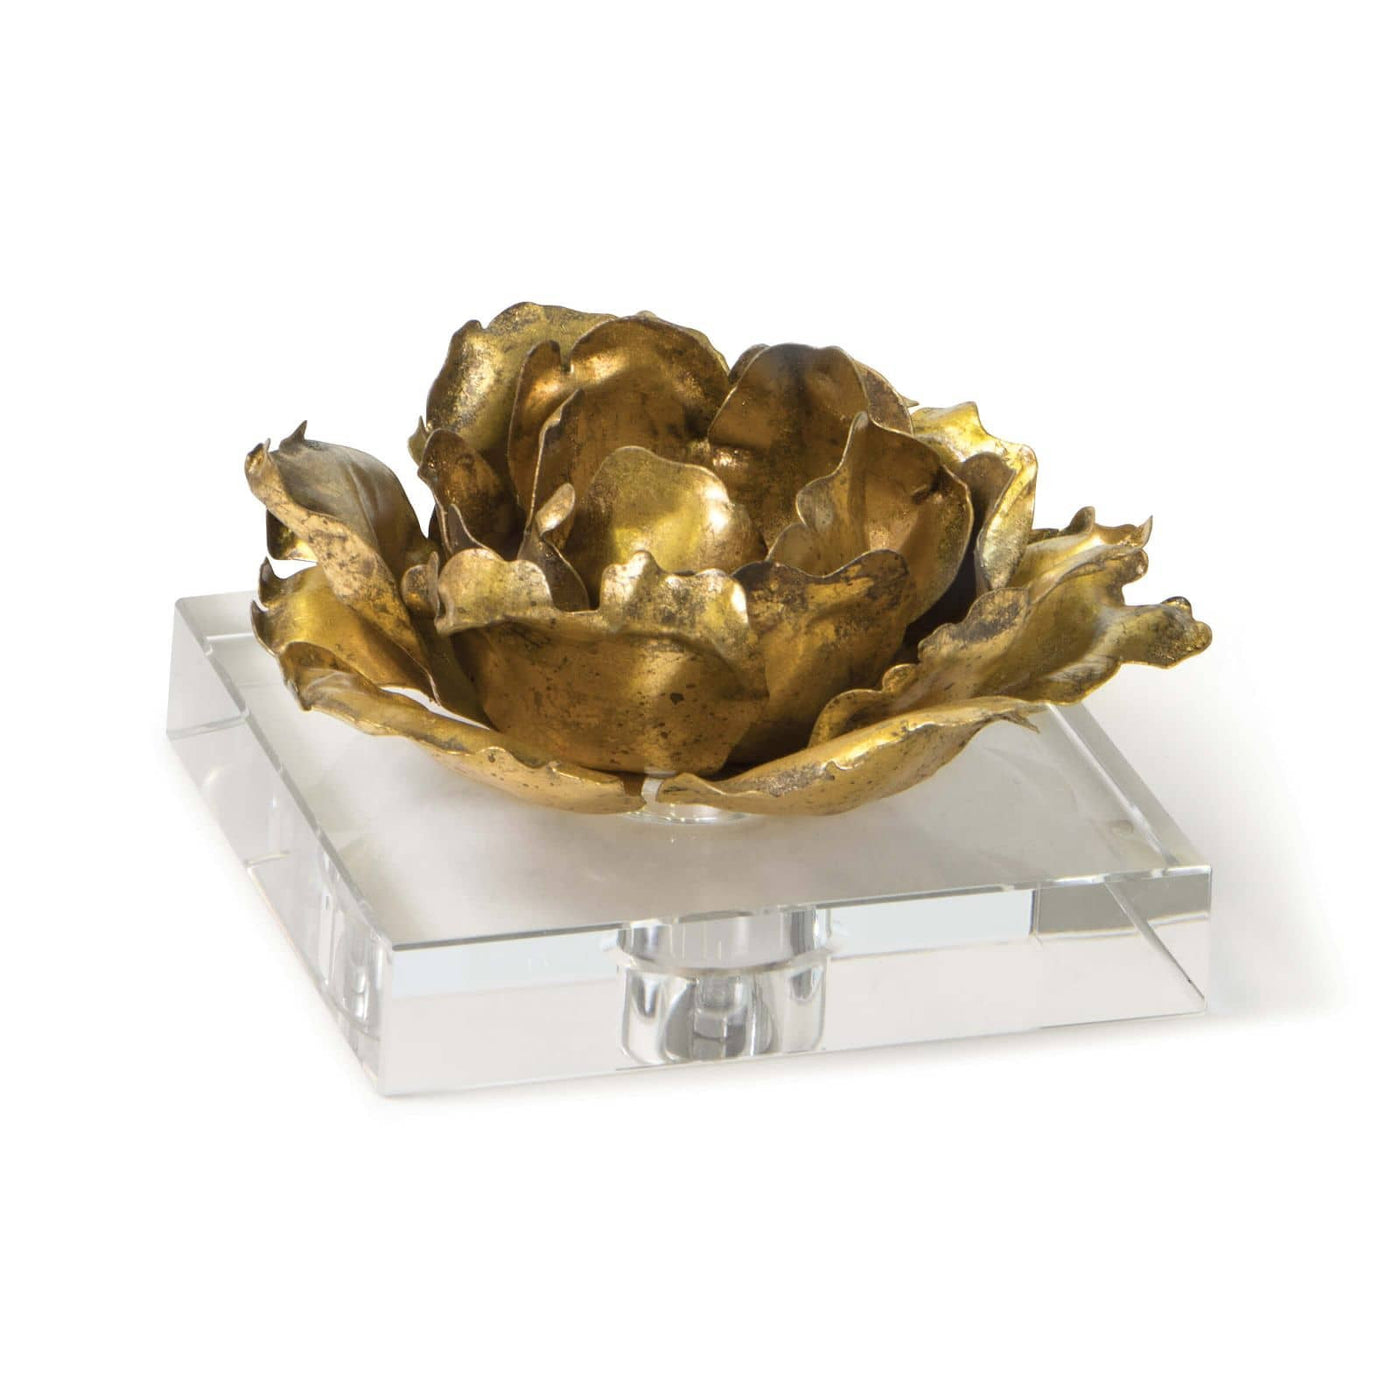 ACCESSORY GOLD BLOSSOM ON ACRYLIC STAND